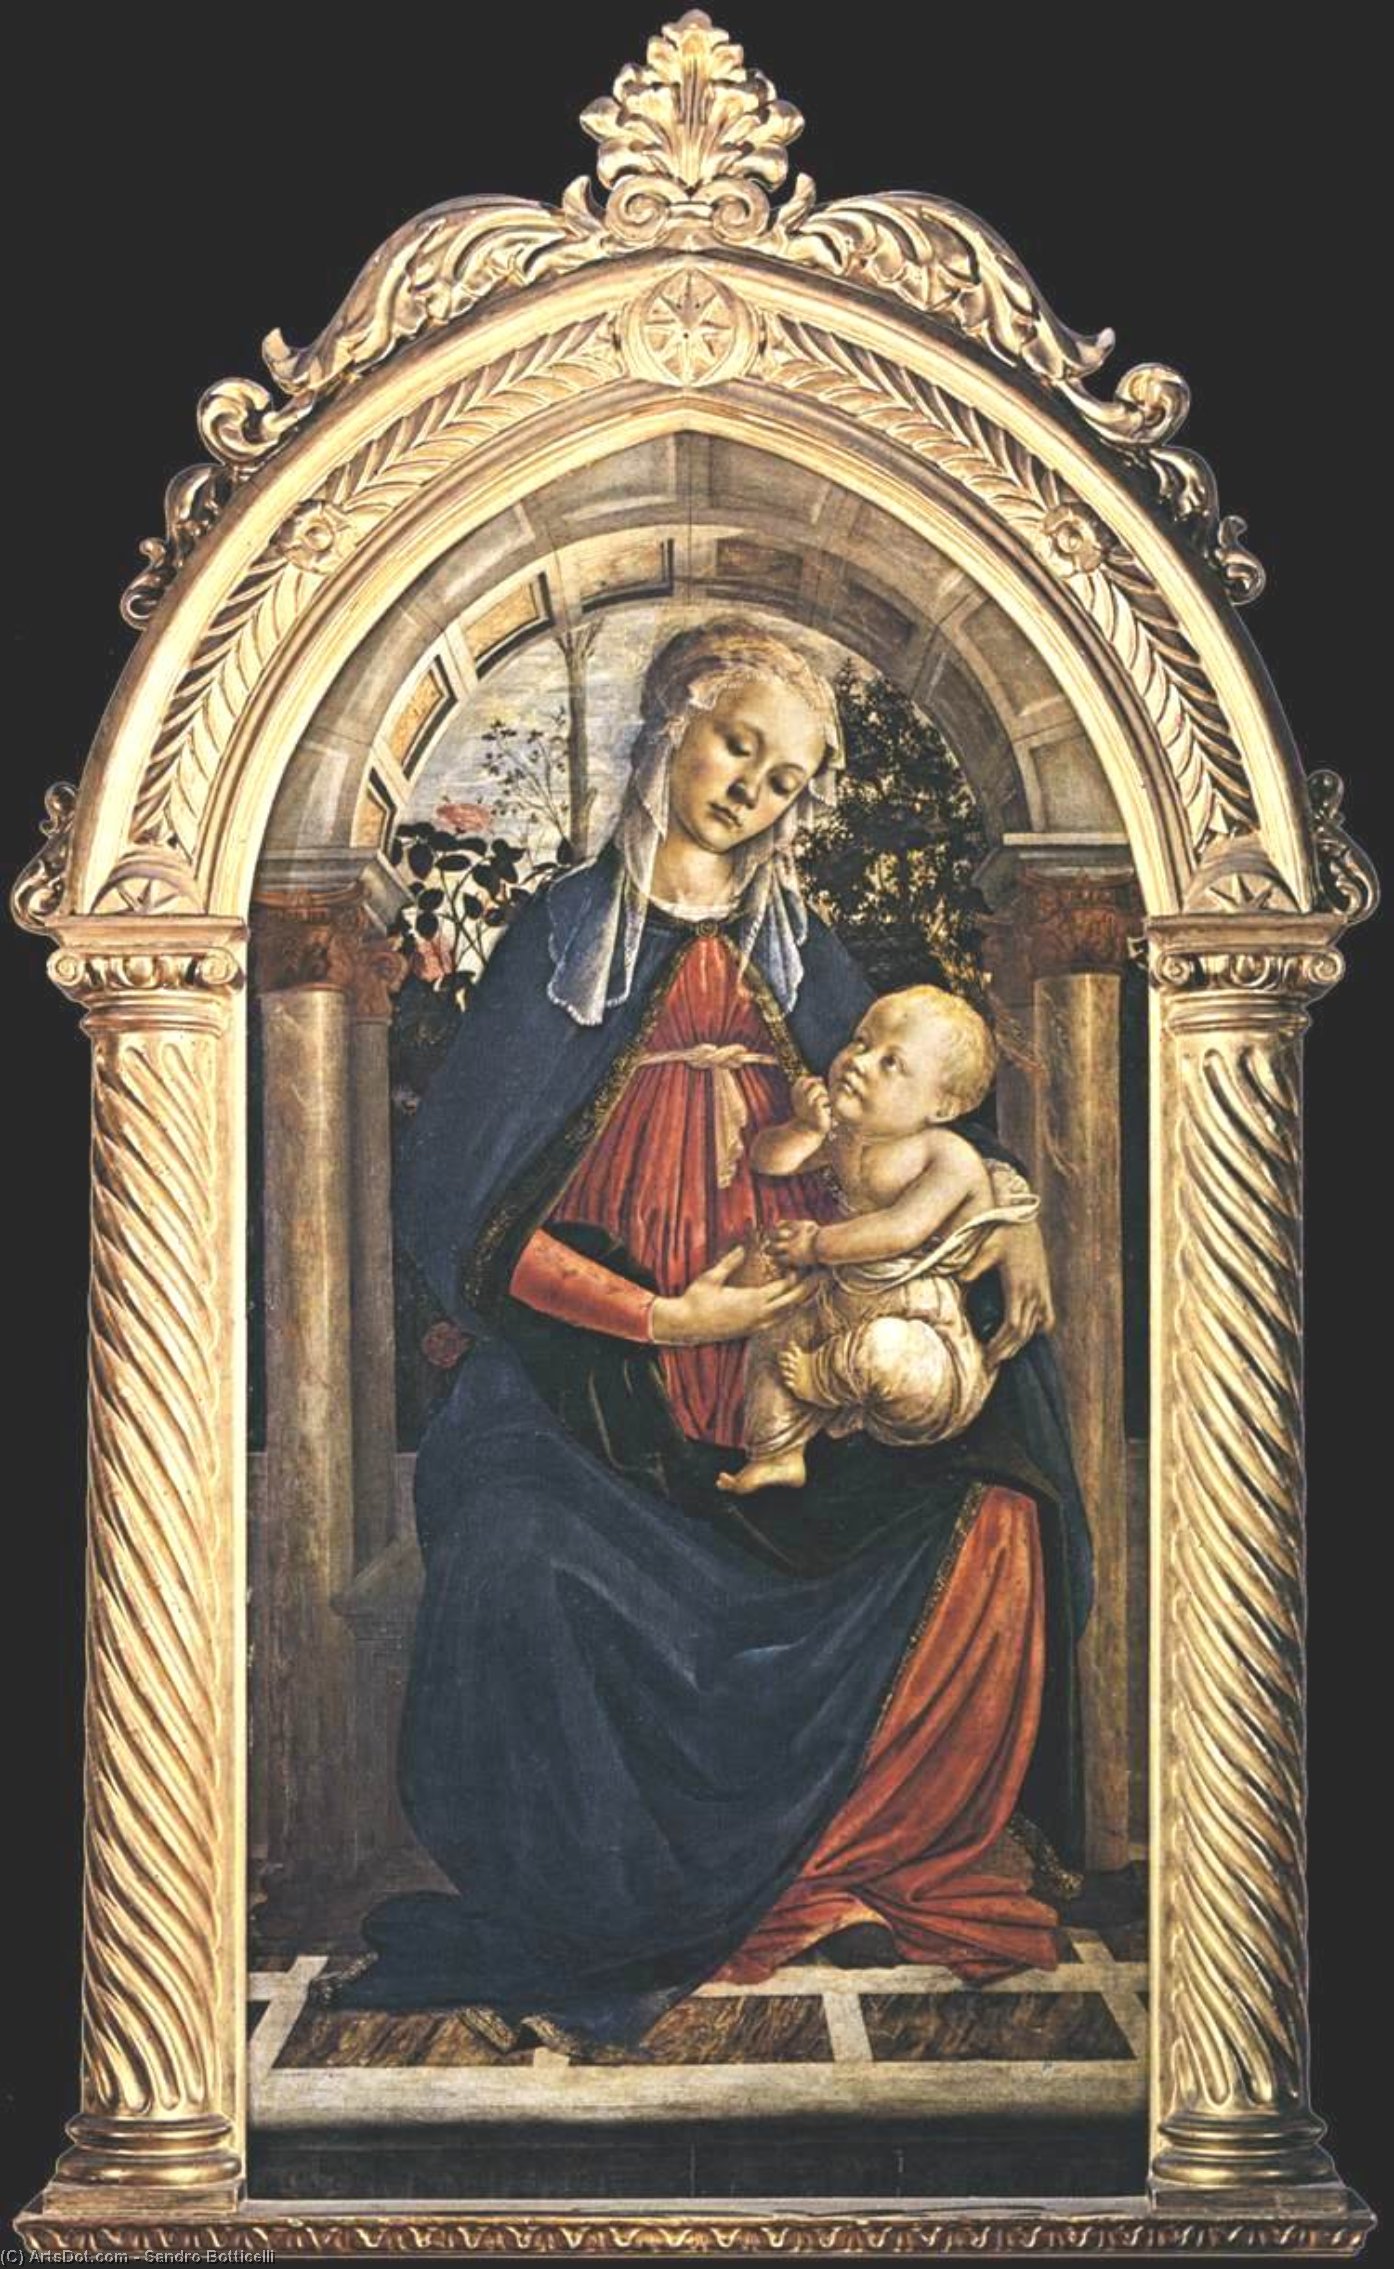 WikiOO.org - 백과 사전 - 회화, 삽화 Sandro Botticelli - Madonna of the Rosengarden (also known as Madonna del Roseto)